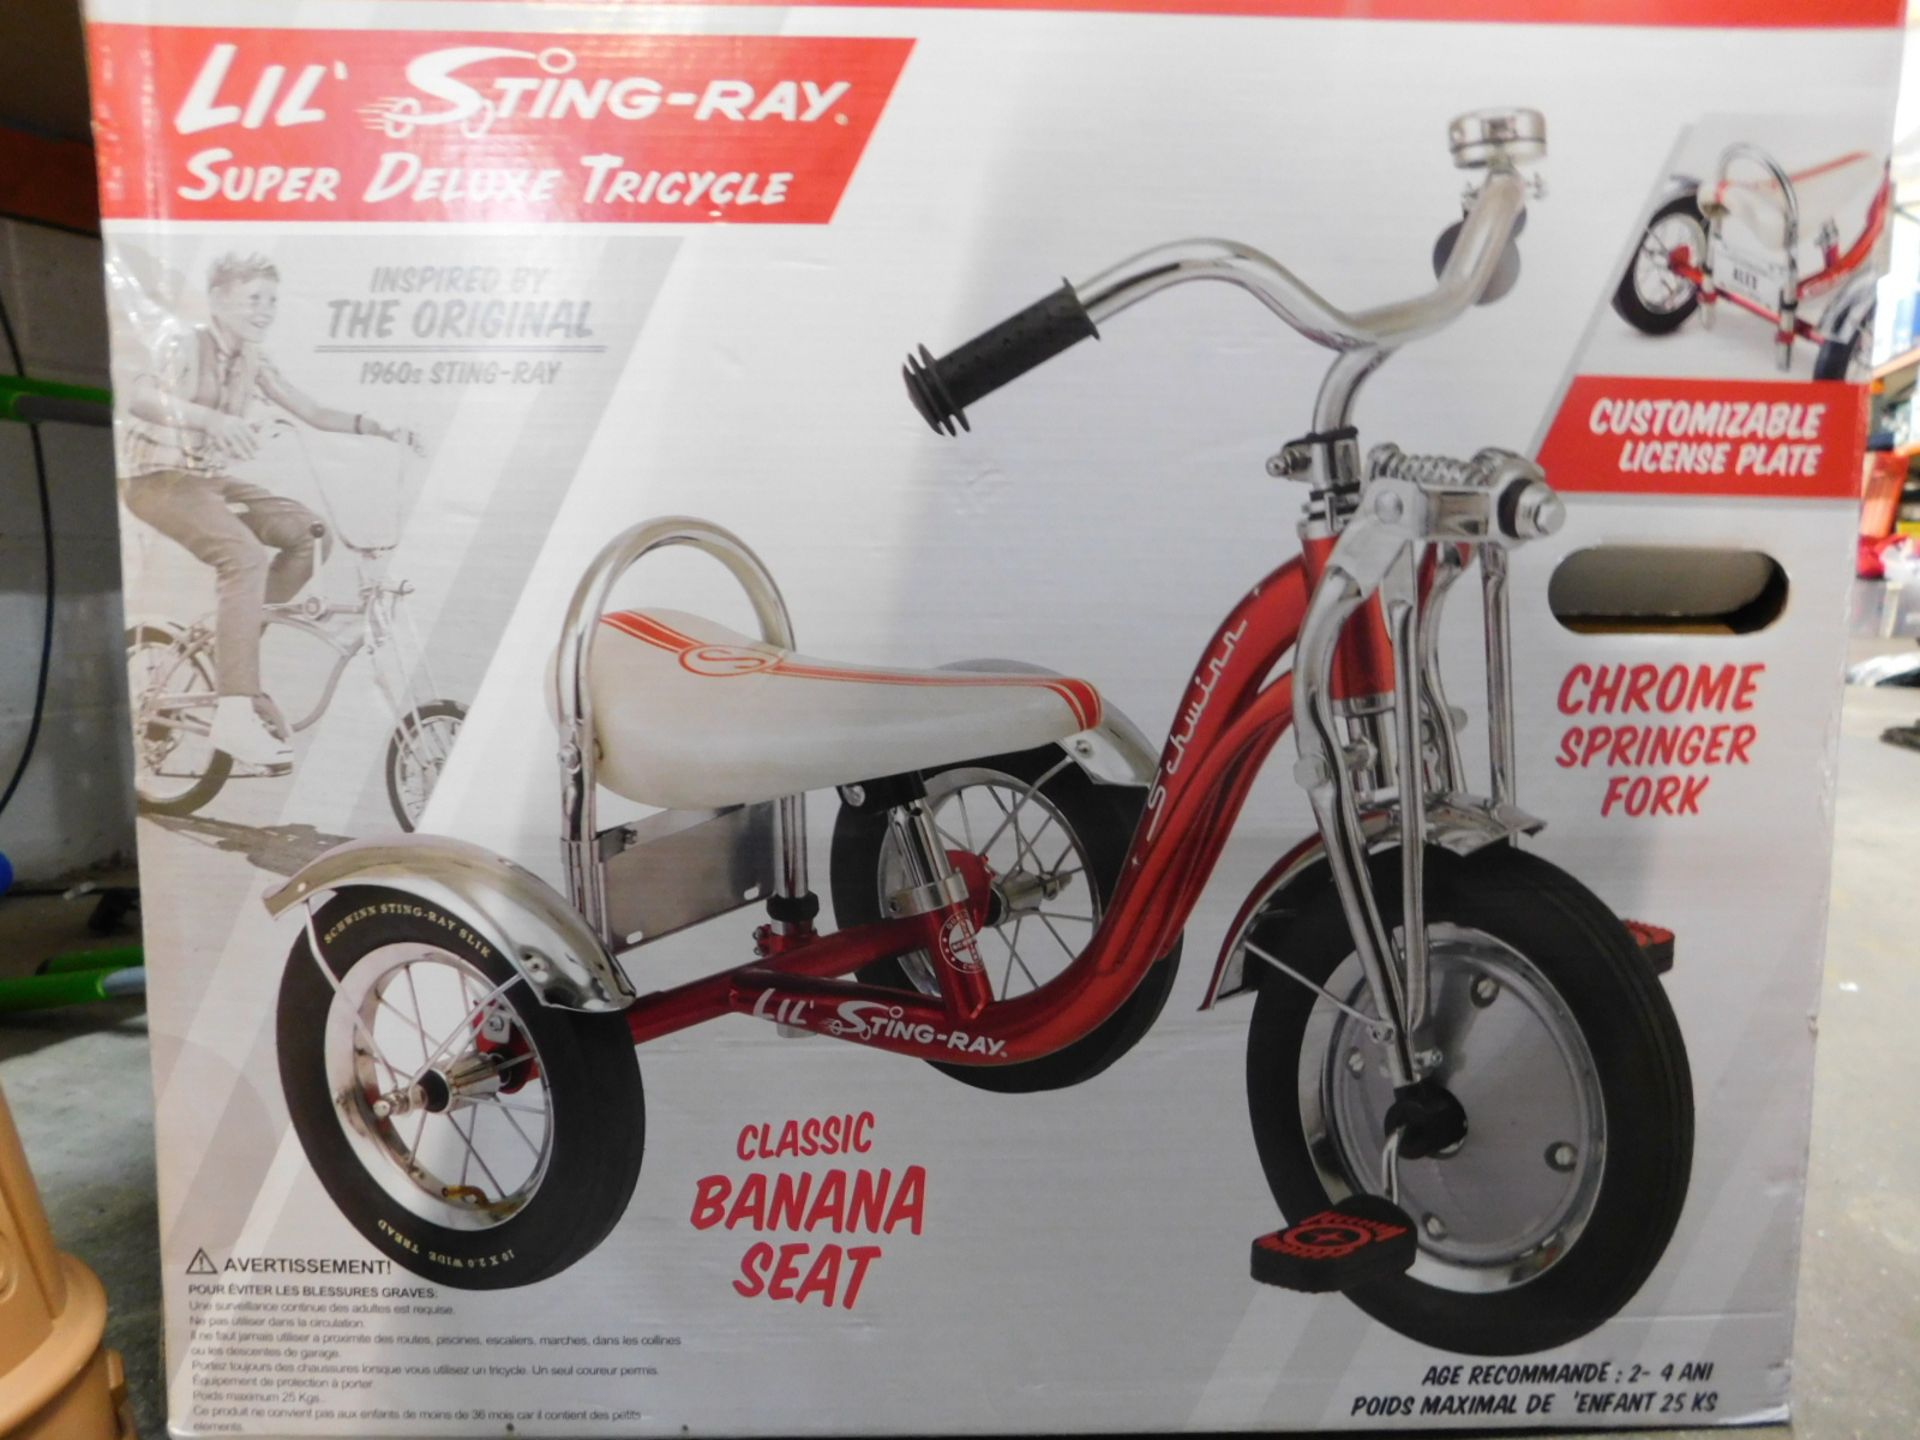 1 BOXED SCHWINN LIL STING-RAY SUPER DELUXE TRICYCLE RRP Â£129.99